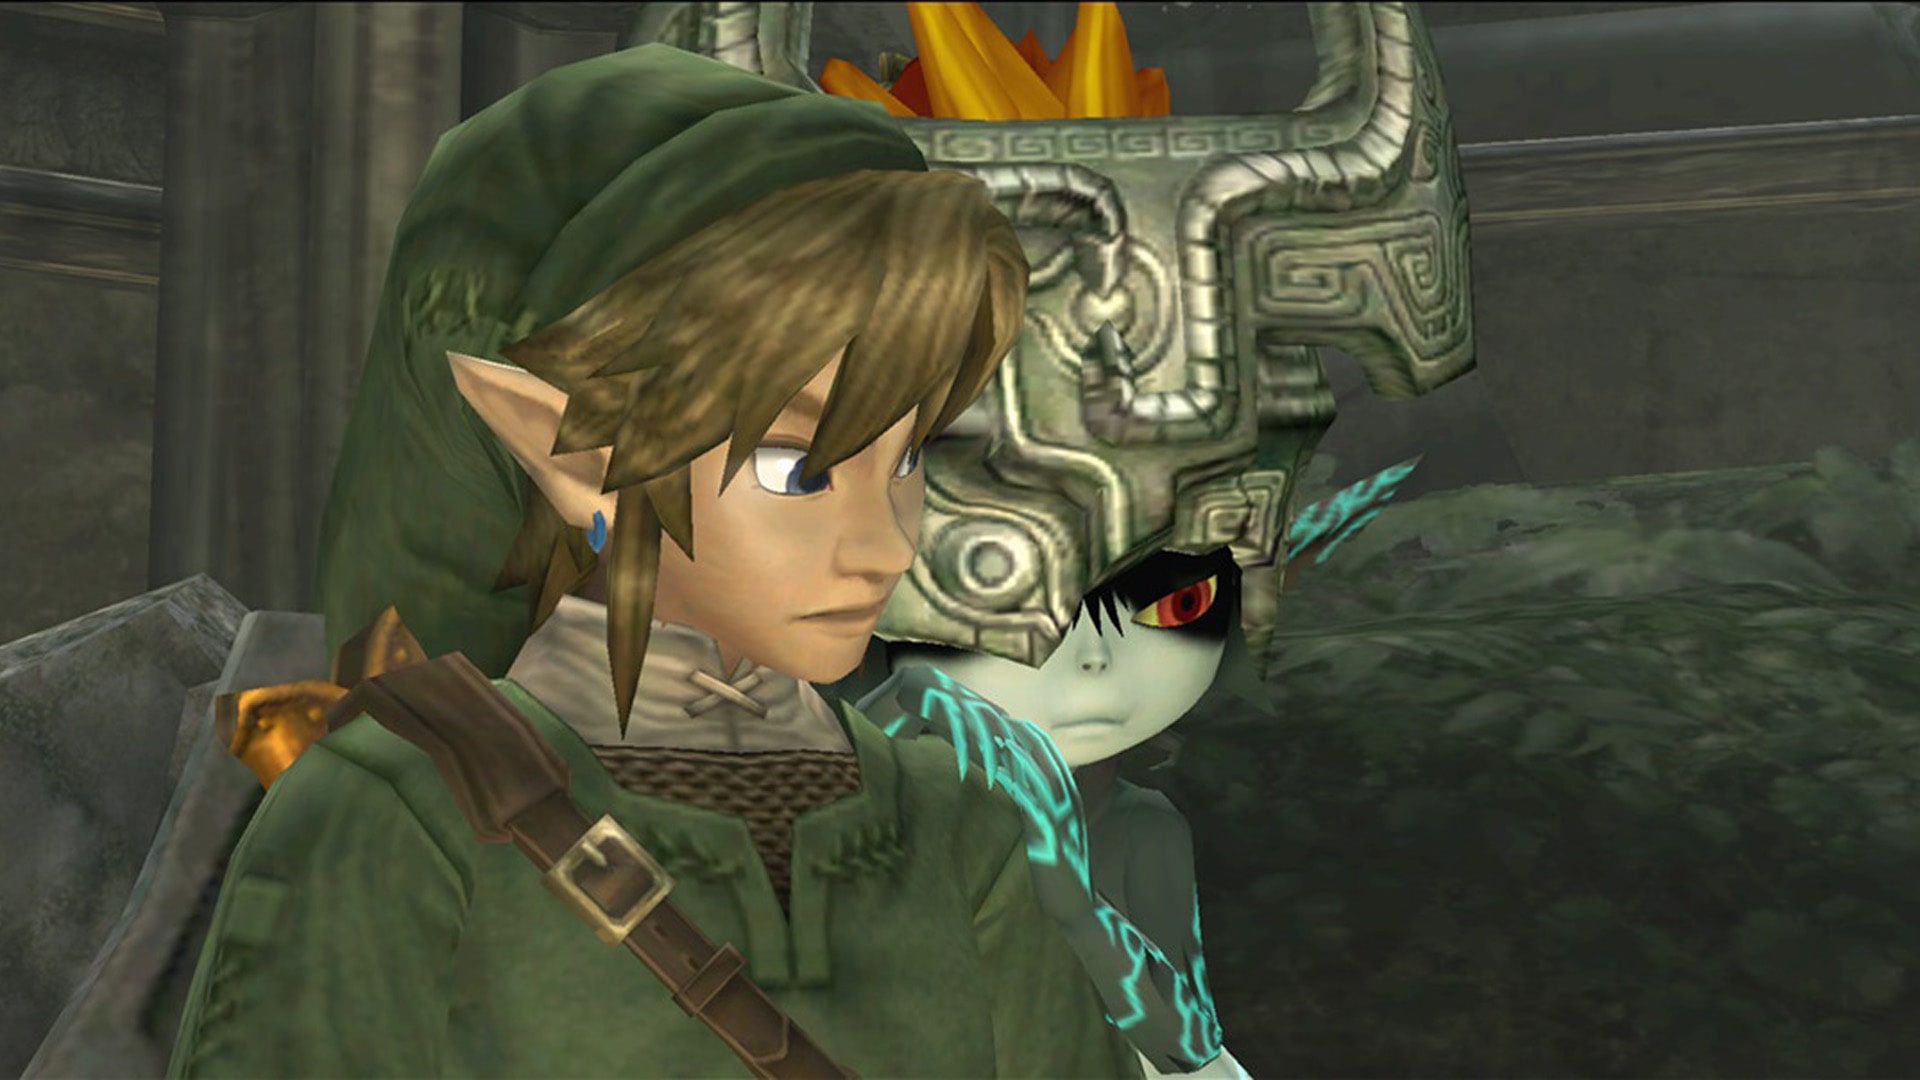 Cover art for The Legend of Zelda: Twilight Princess HD featuring Link and Wolf Link